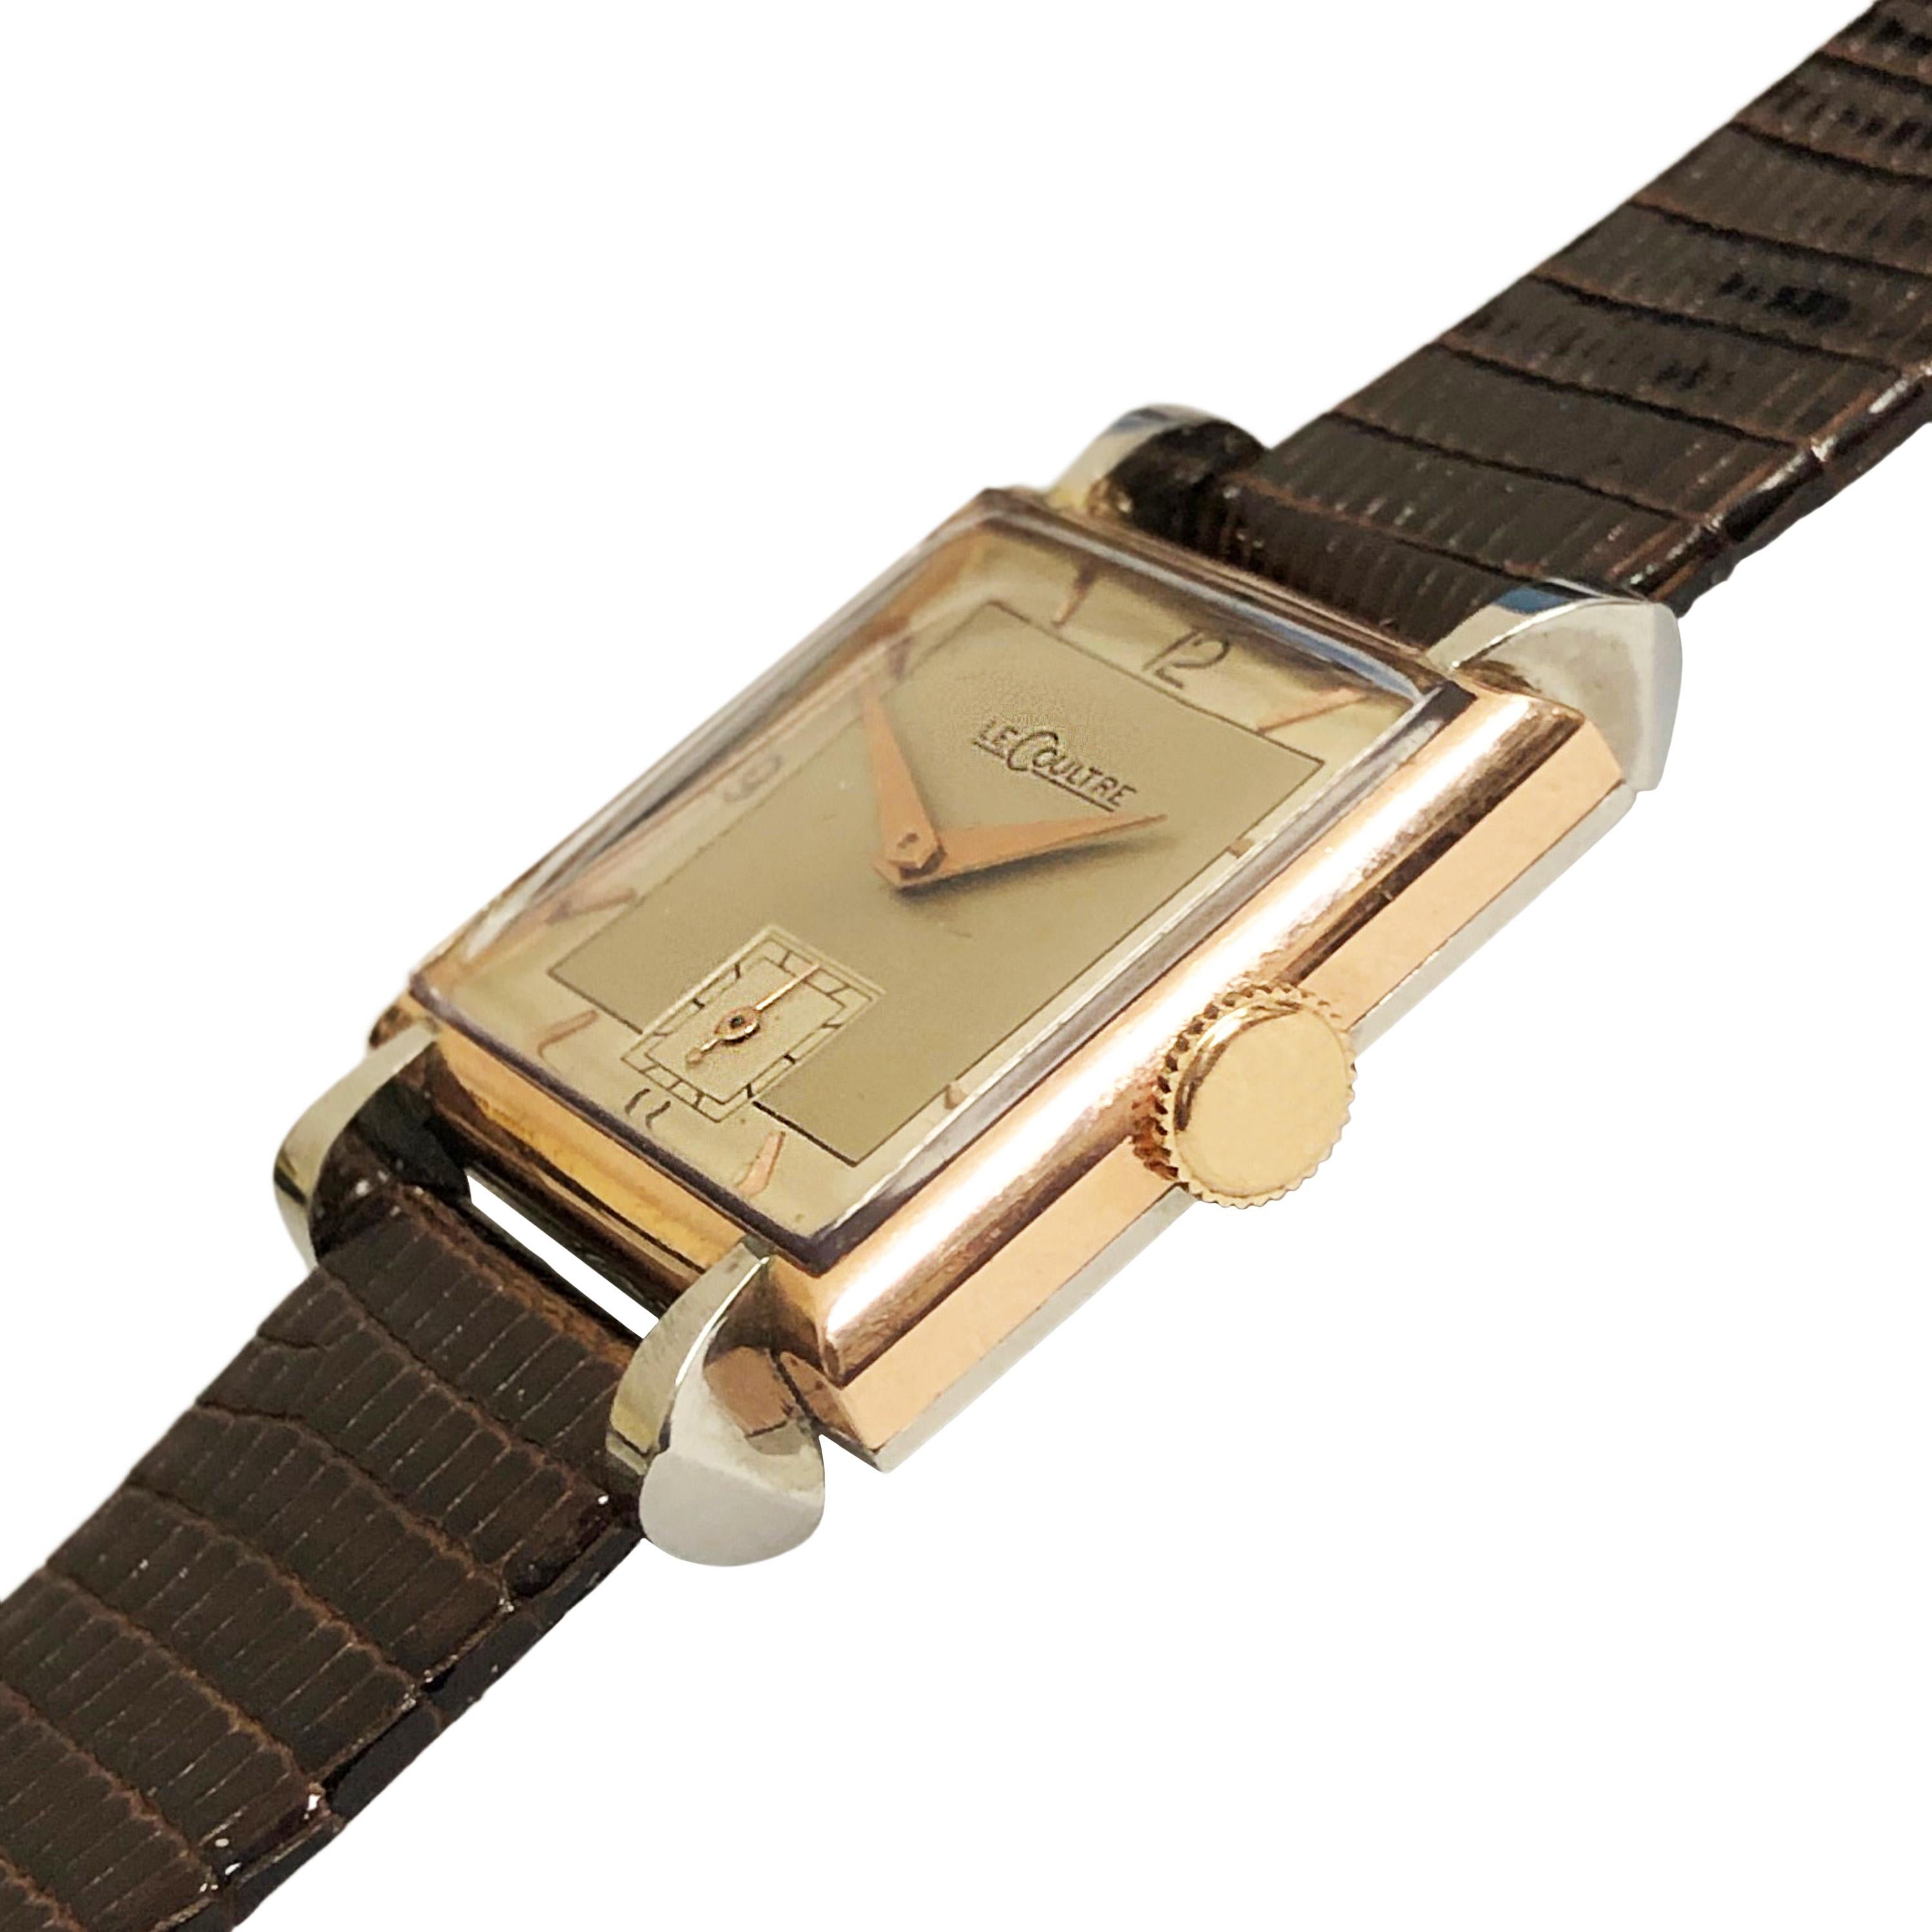 Circa 1940s Jaeger LeCoultre Wrist Watch, 34 X 25 MM 2 Piece Stainless Steel and Rose Gold Case with Flared Lugs. 17 Jewel Mechanical, Manual wind movement, original 2 tone silvered dial with raised Rose Gold markers and Rose Gold hands. New Brown